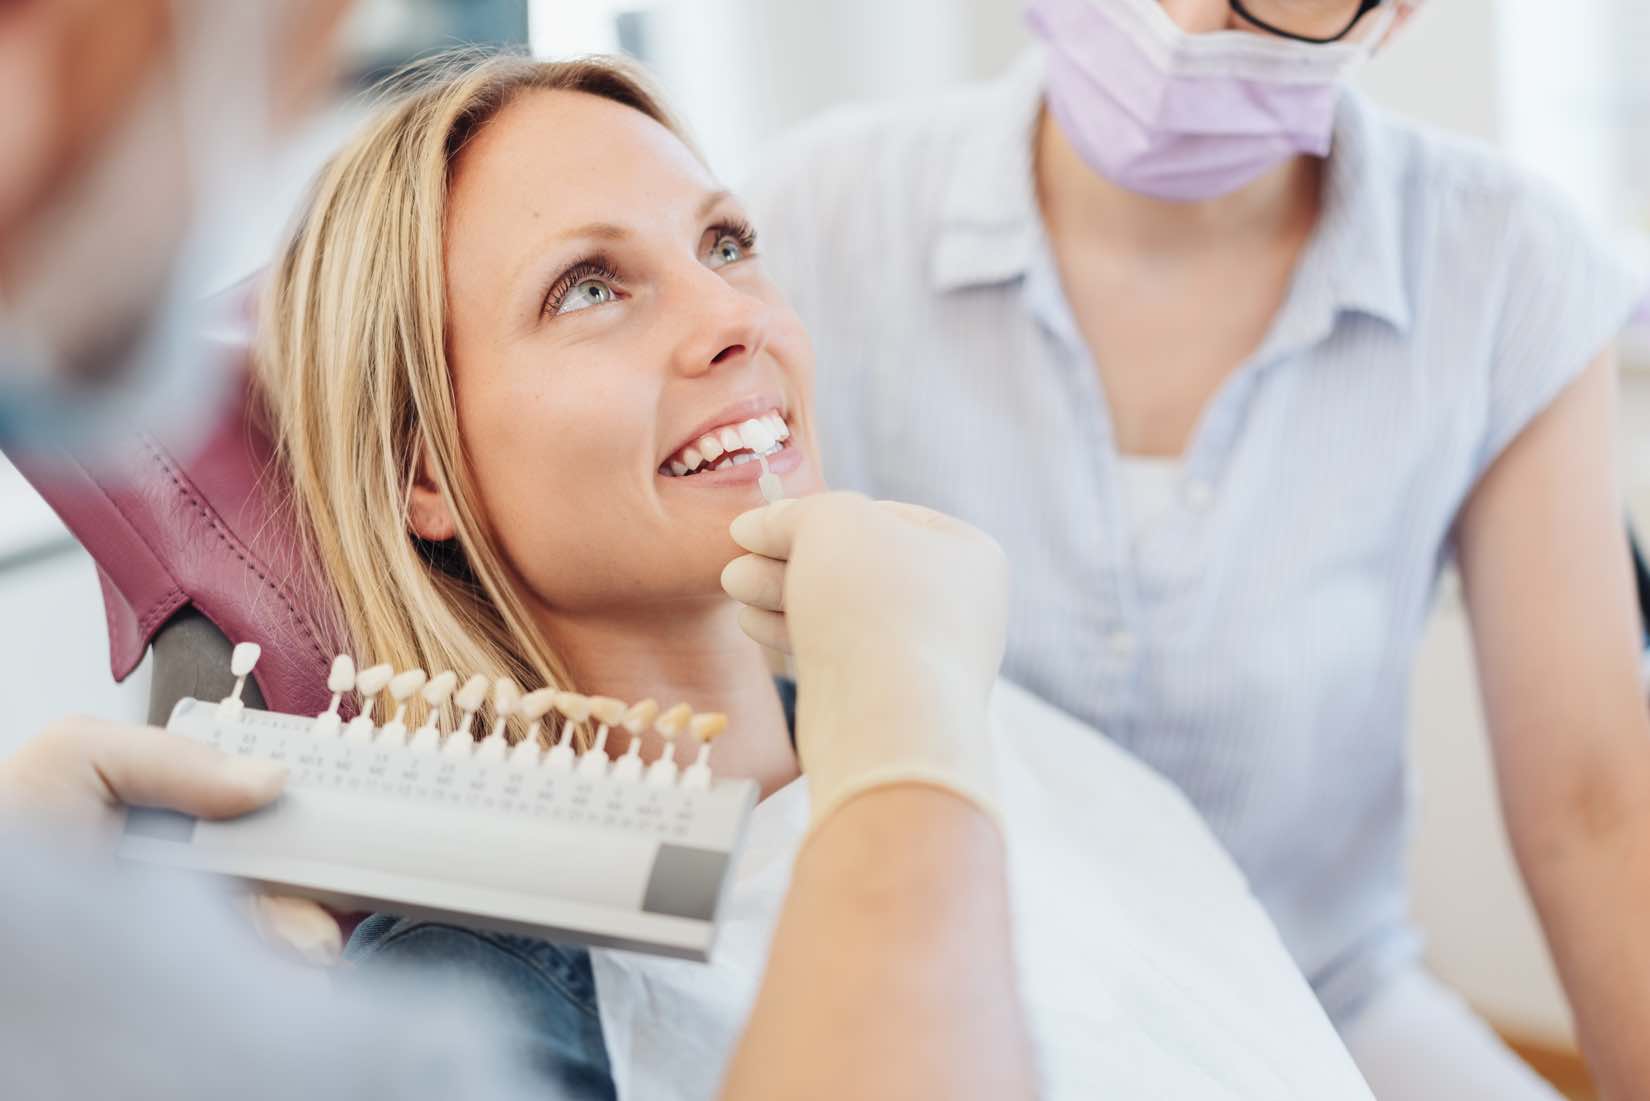 Woman at Smiles at Fleetwood dental group before her cosmetic dentistry procedure.